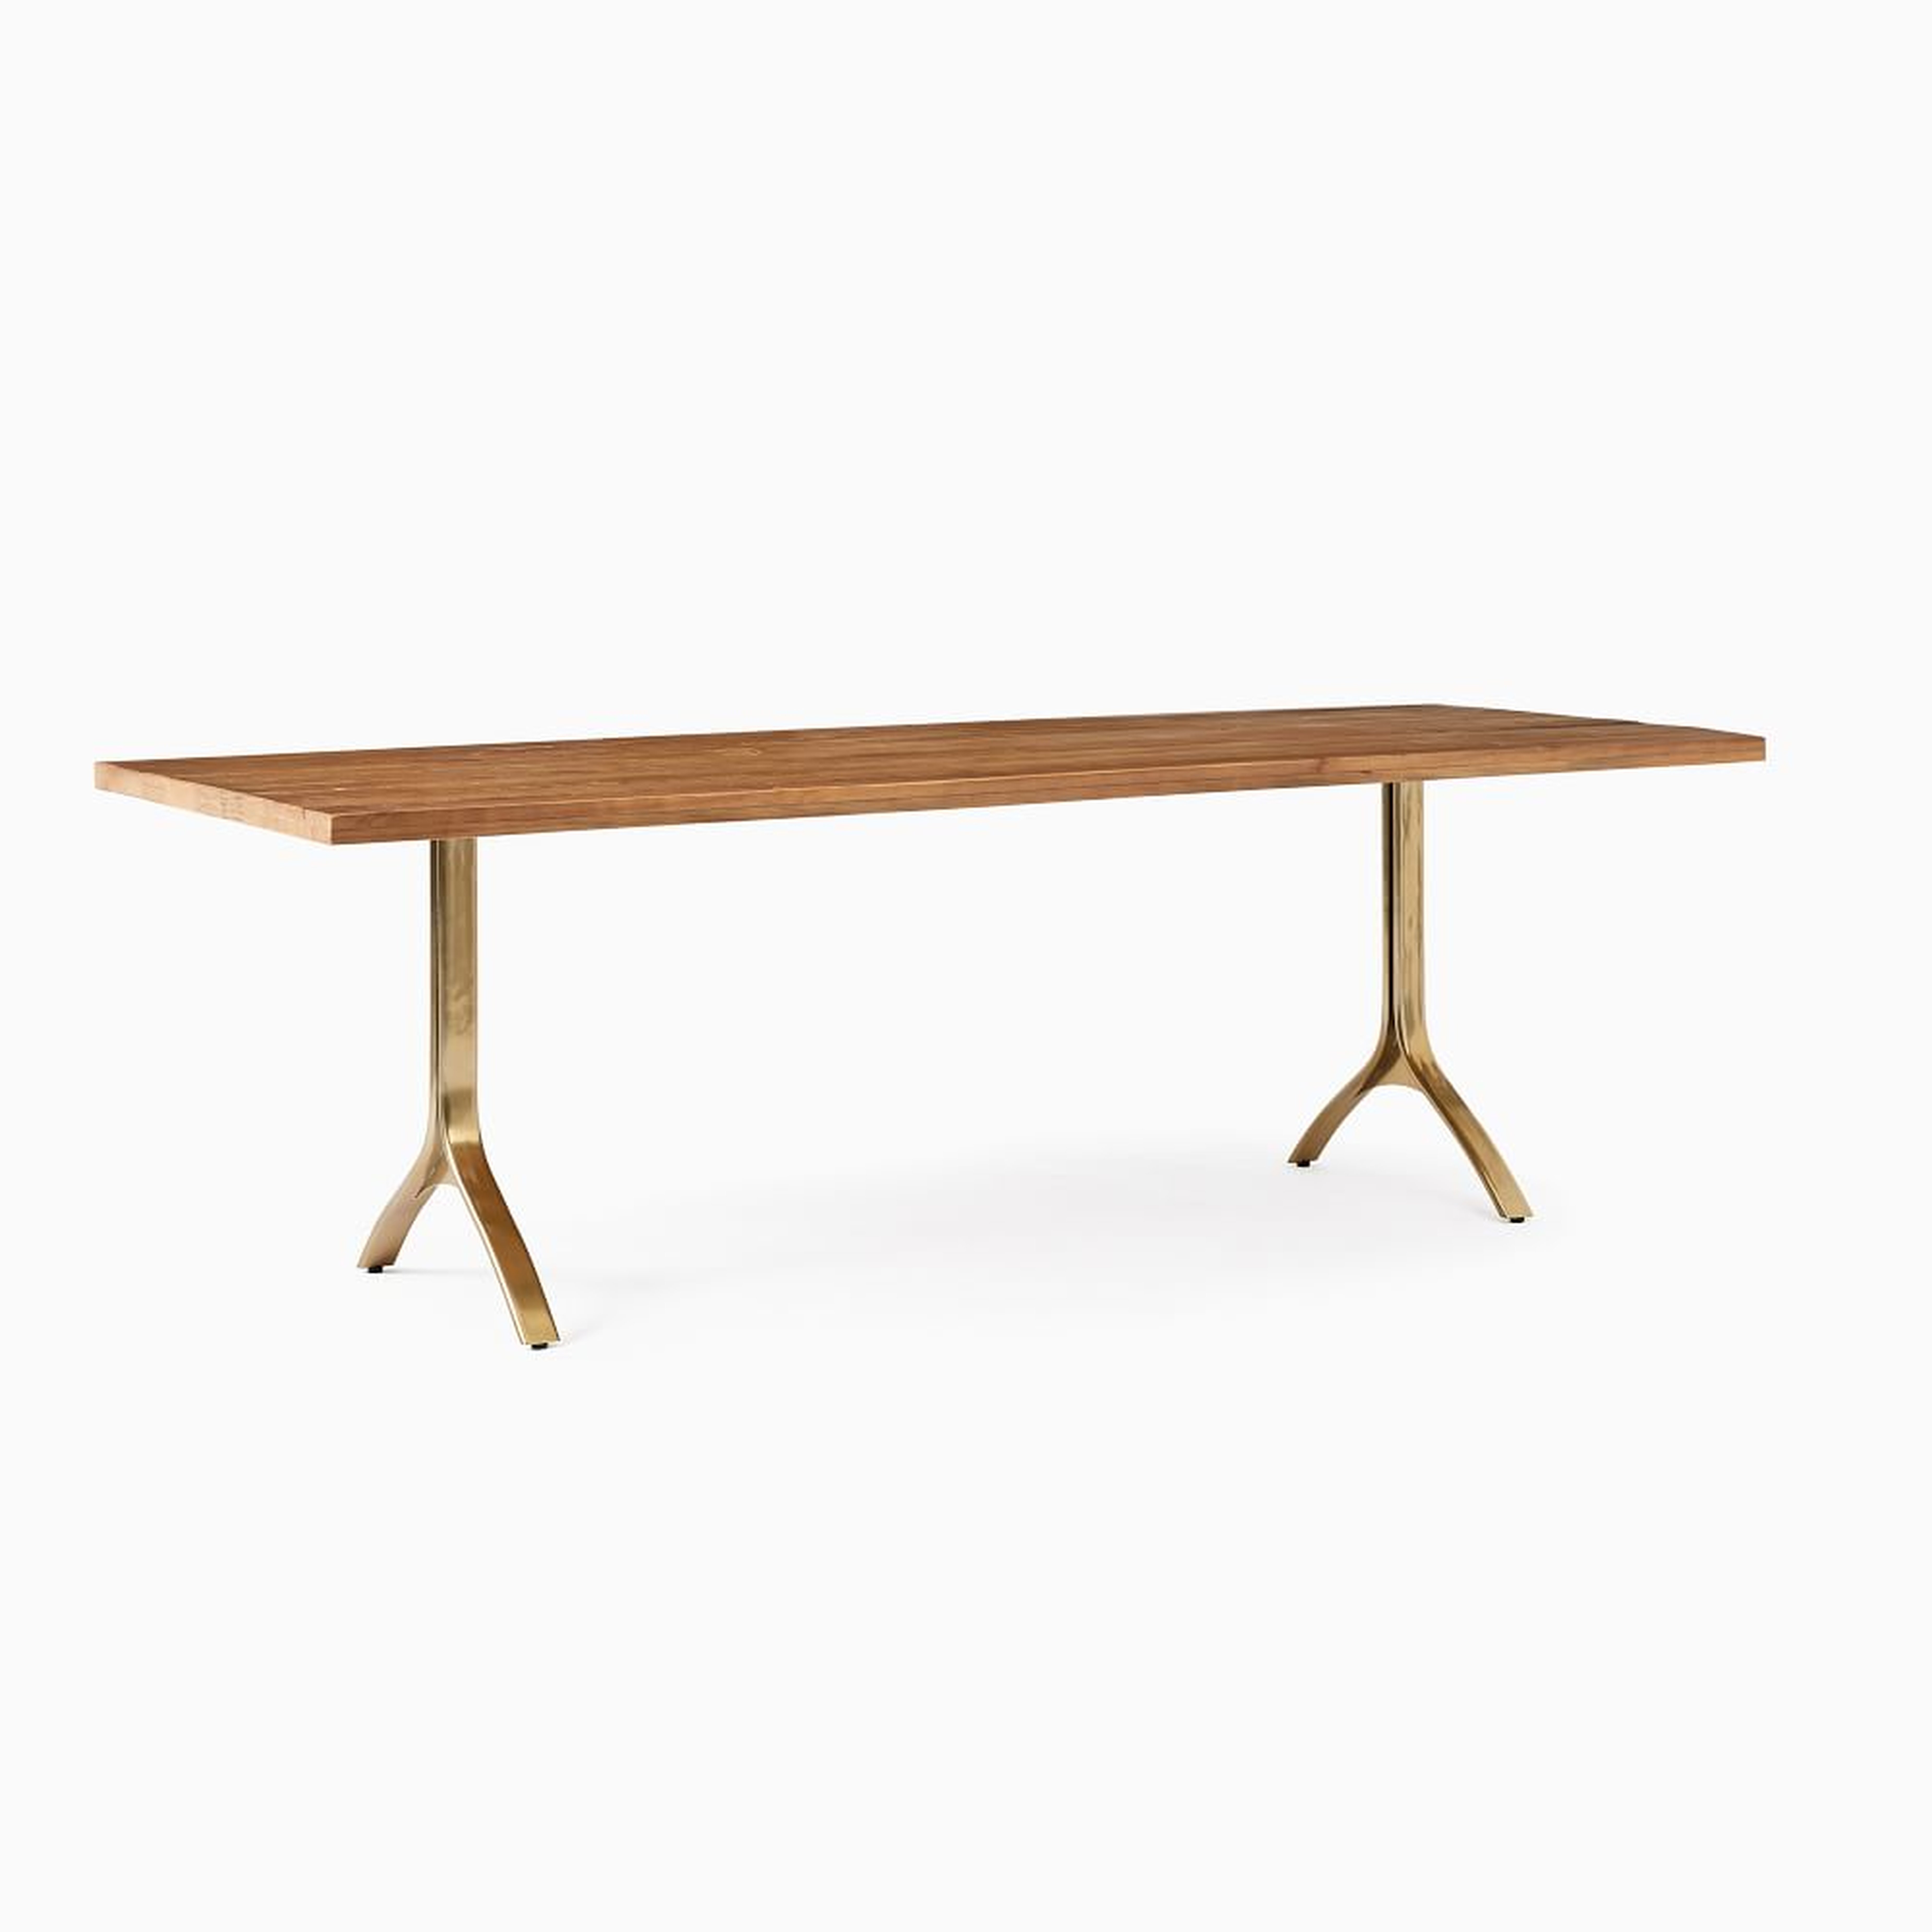 Avery Wishbone 94" Dining Table, Natural, Antique Brass - West Elm